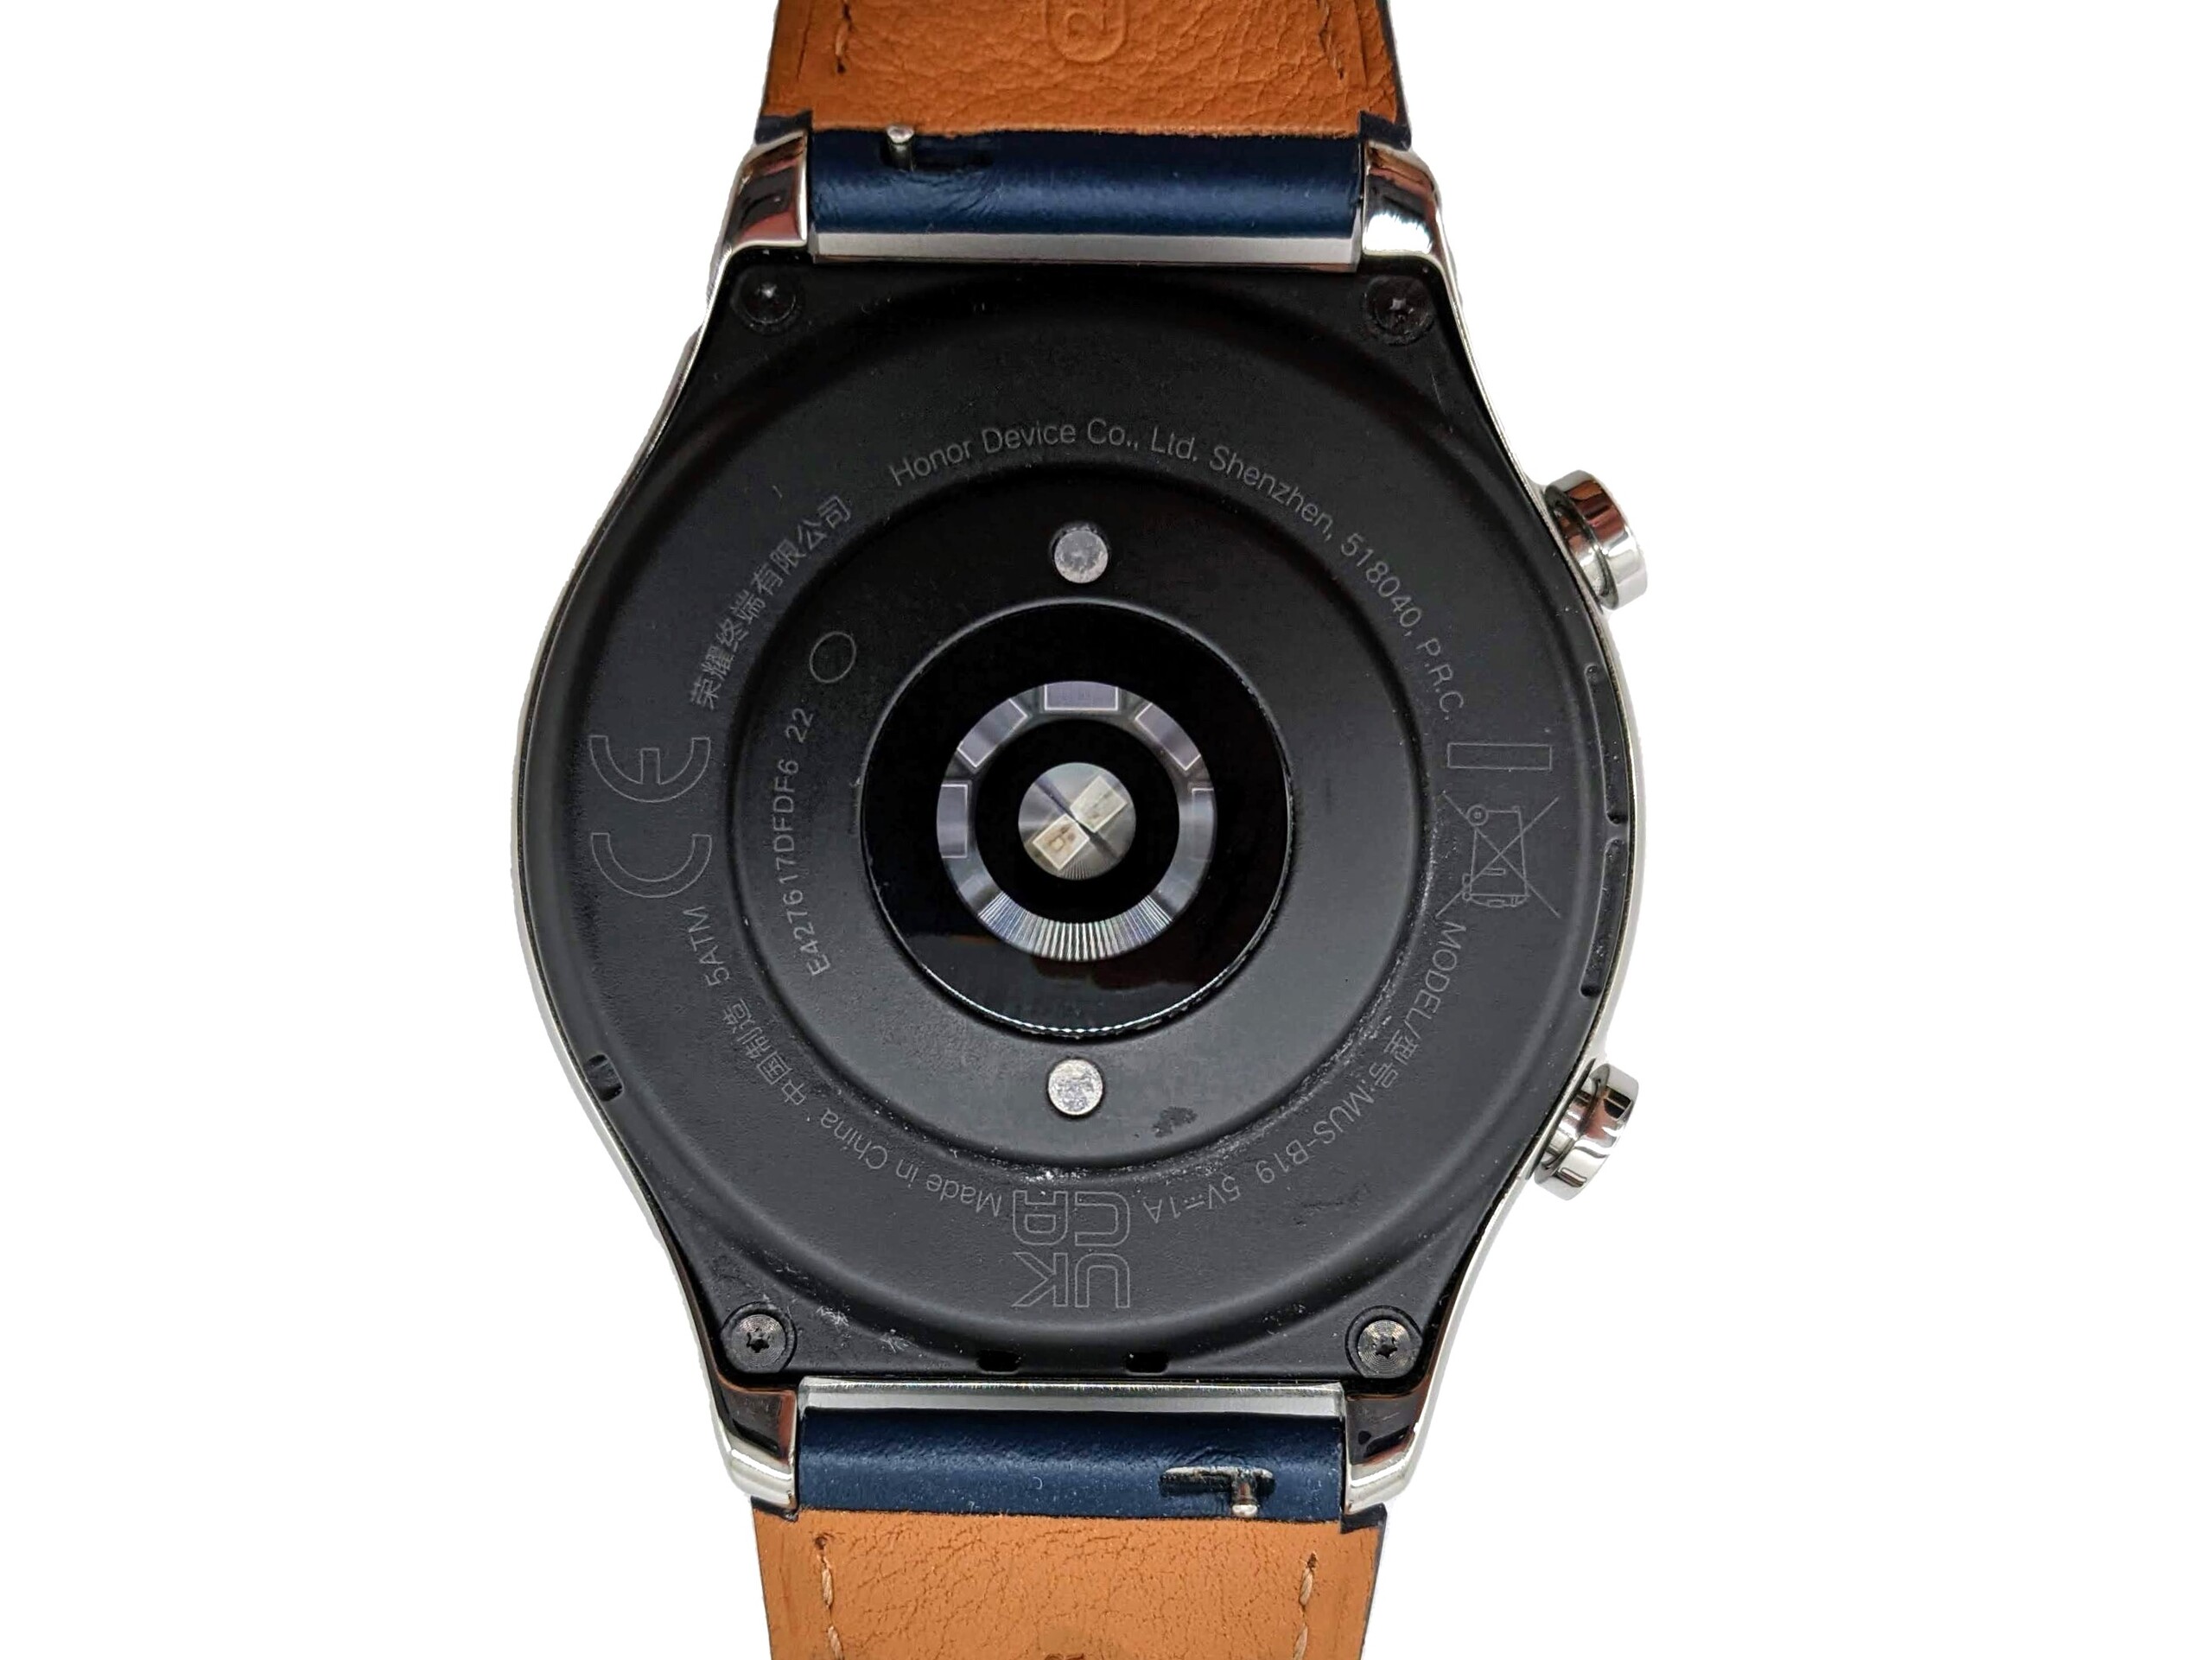 Buy HONOR Watch GS 3 (Leather Strap) for HKD 1499.00